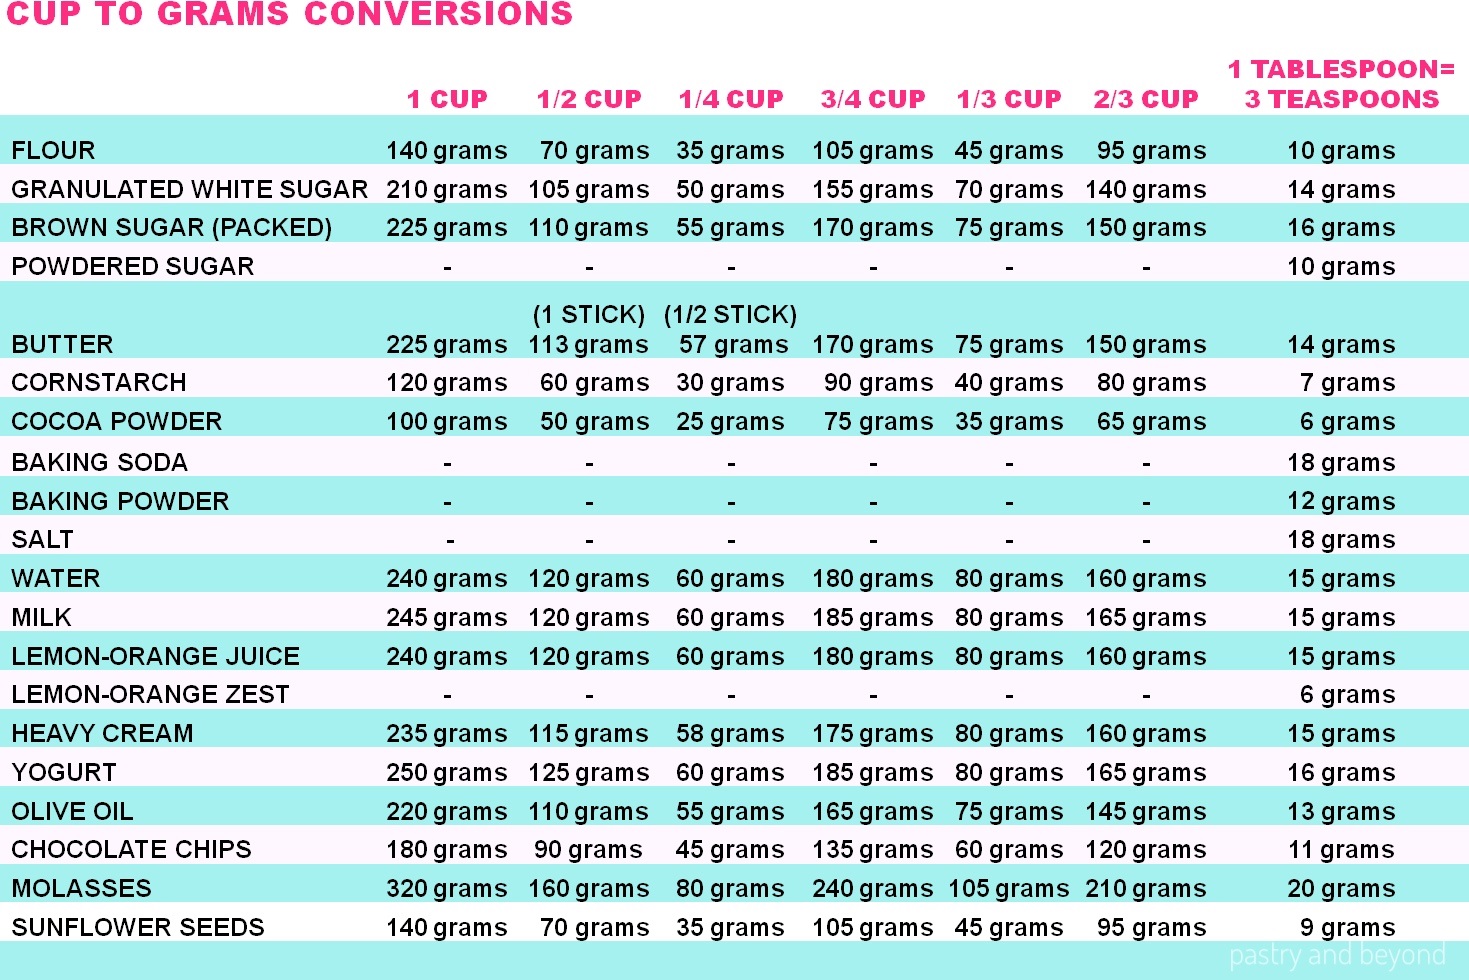 Cup to grams baking conversion chart.